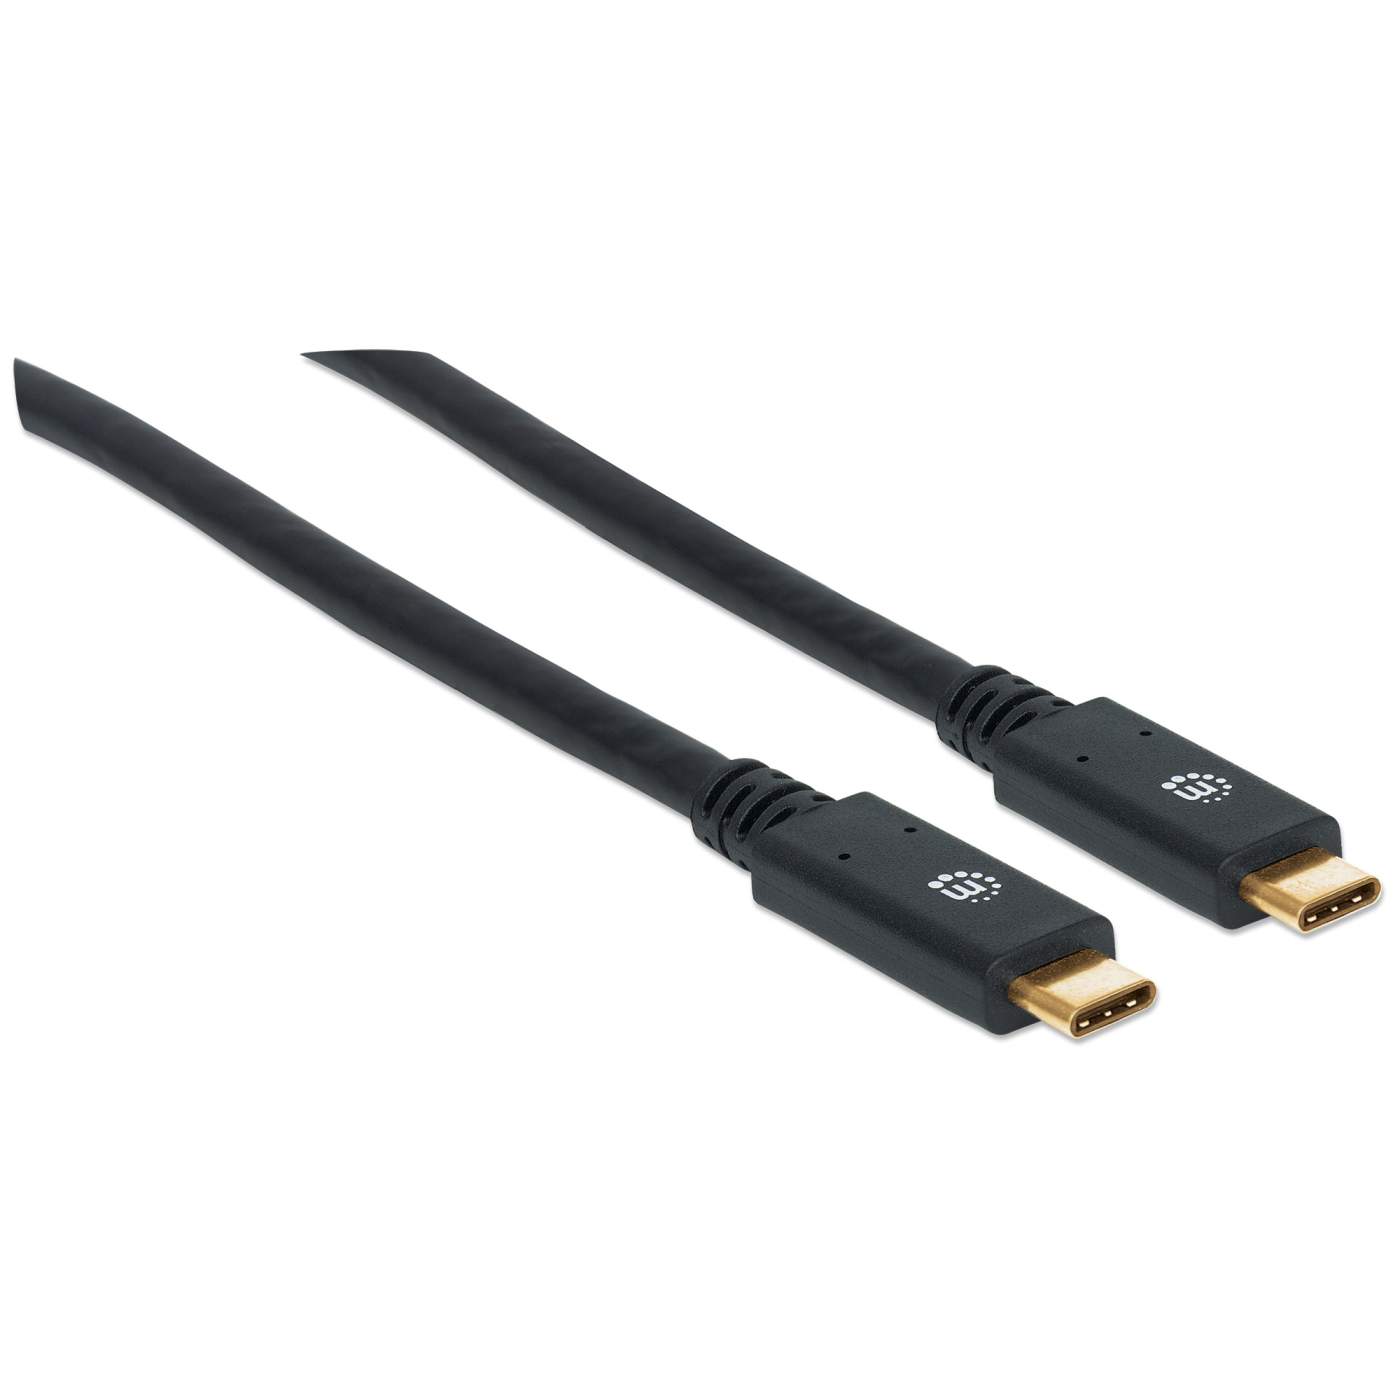 USB 3.0 Type-C Device Cable Image 3